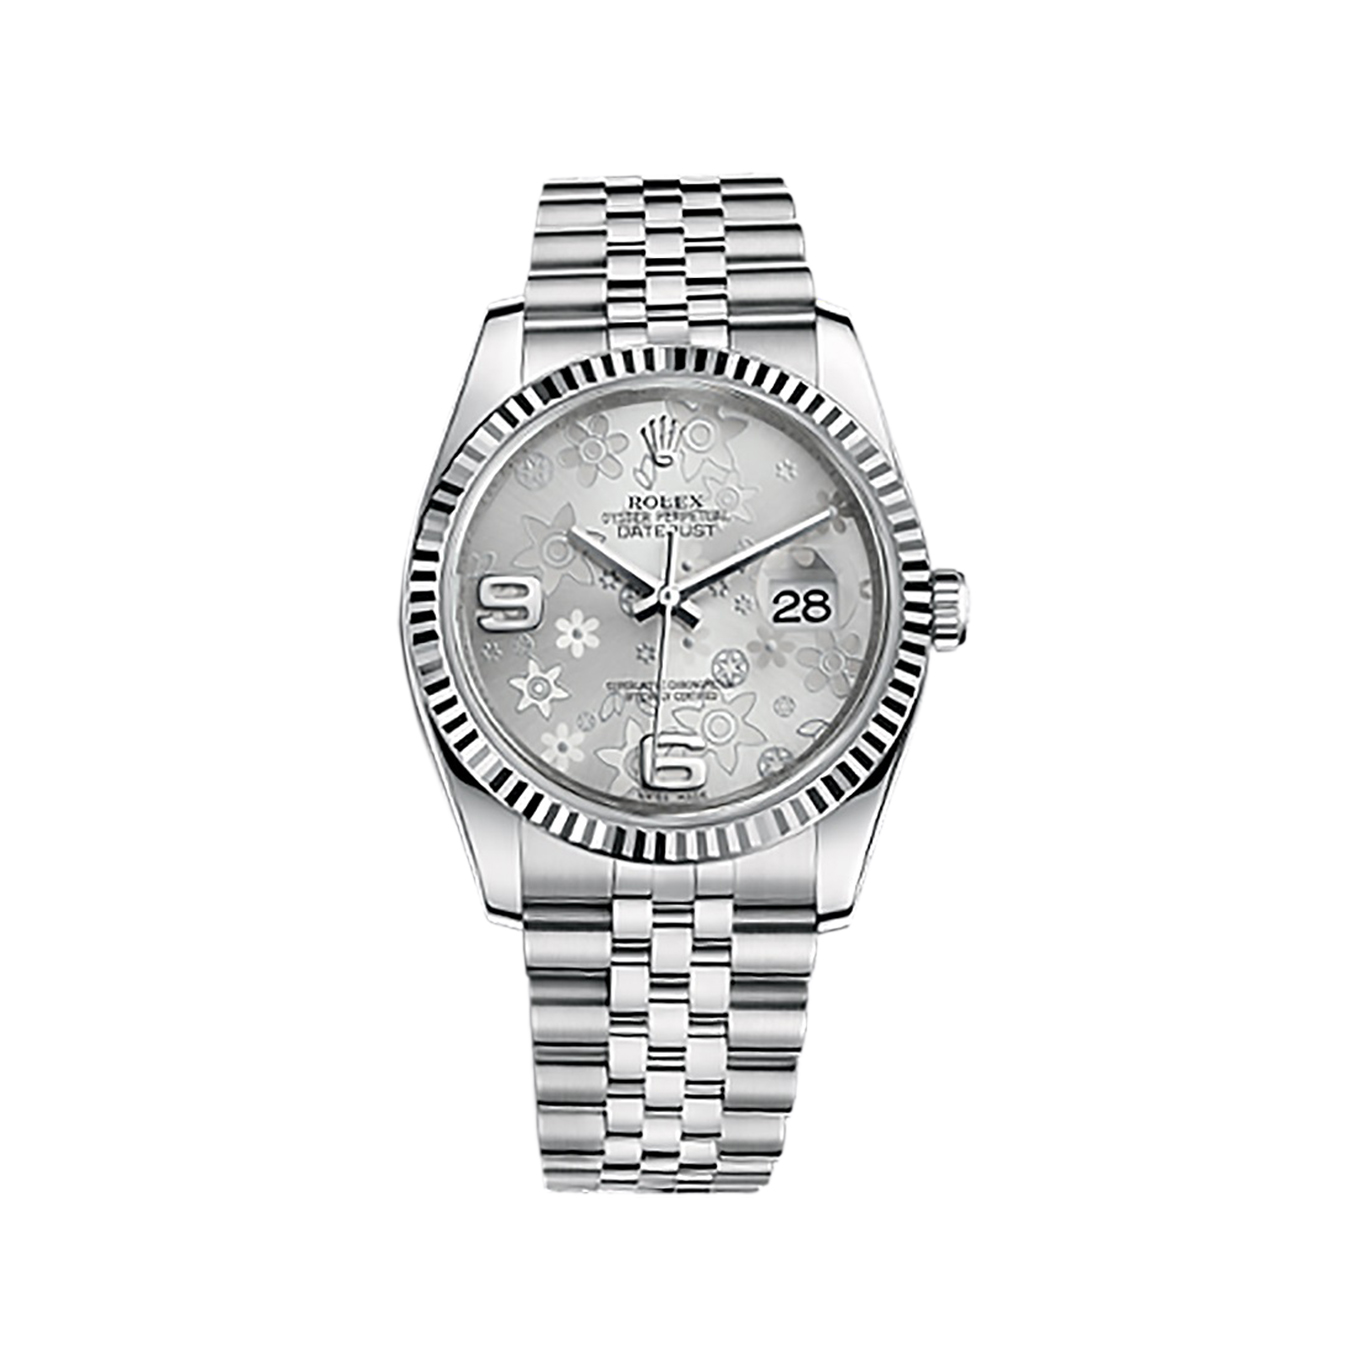 Datejust 36 116234 White Gold & Stainless Steel Watch (Silver Floral Motif)